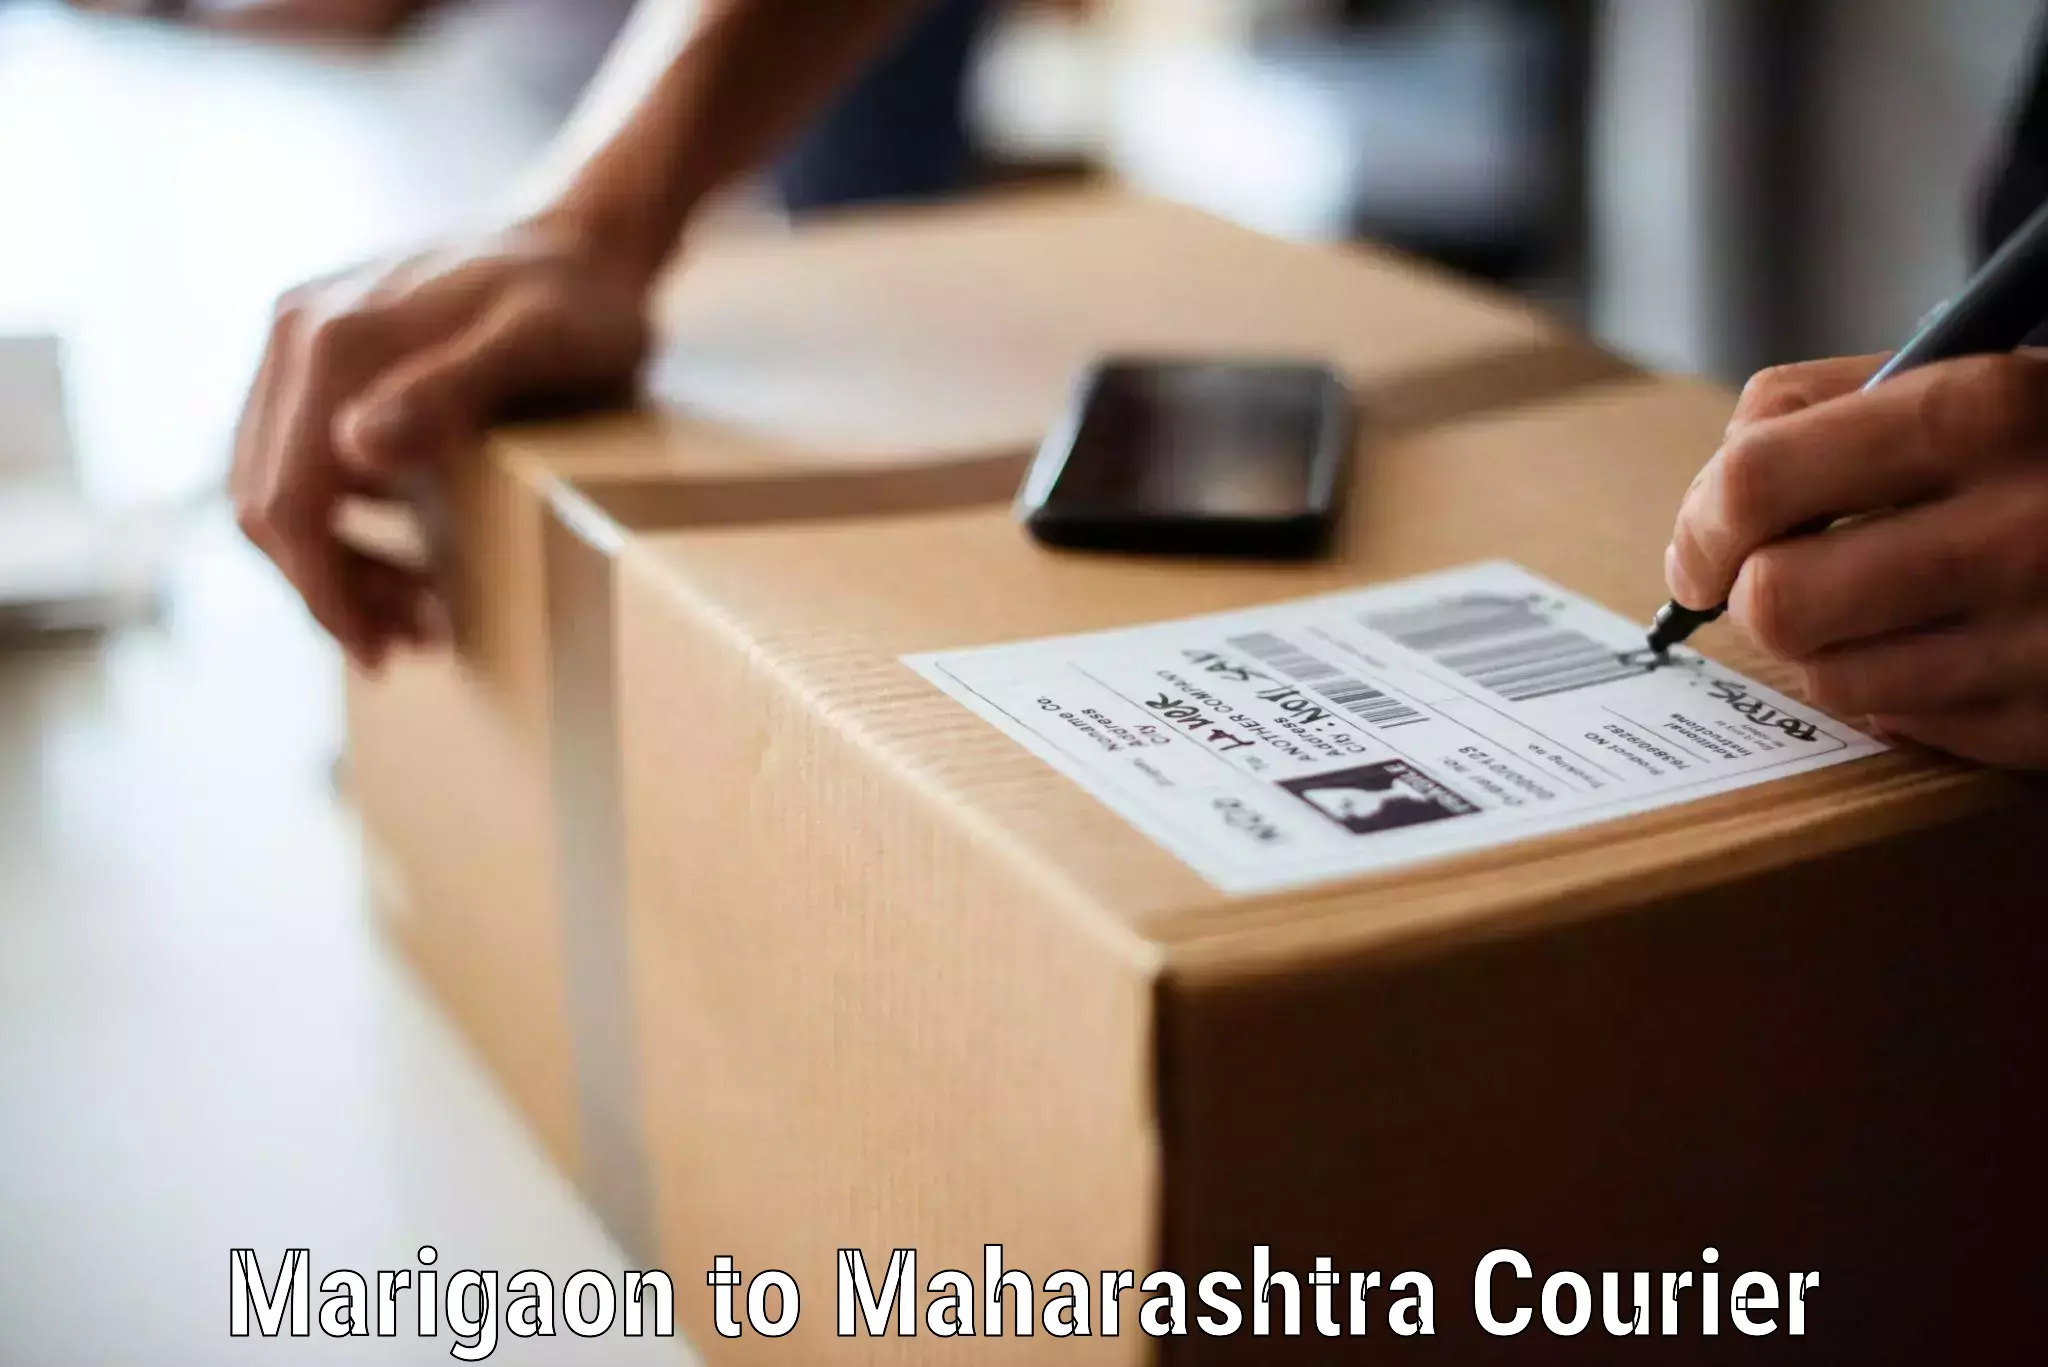 Furniture delivery service in Marigaon to Karjat